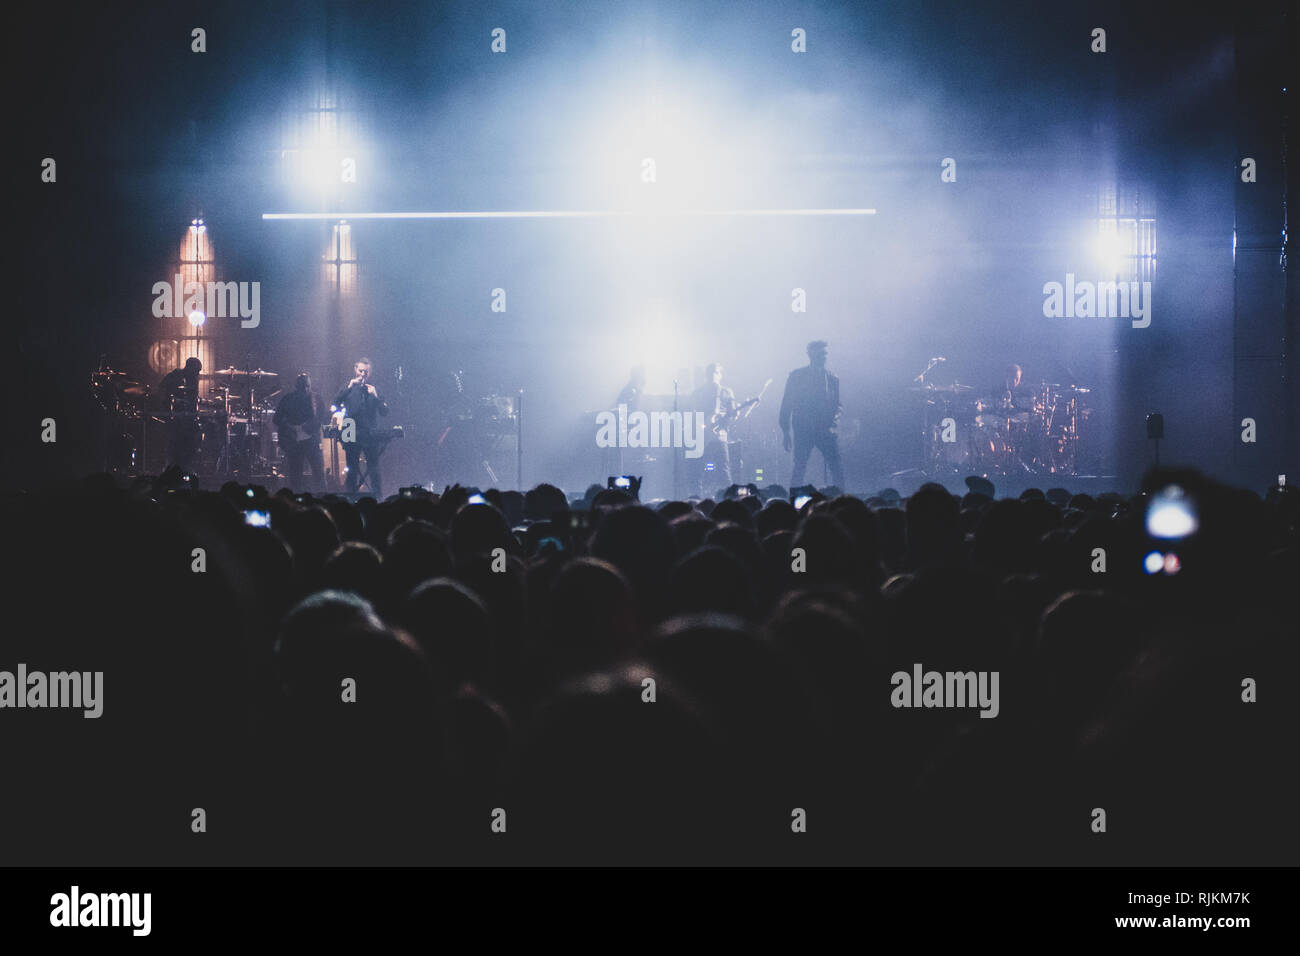 Milan, Italy. 6th February, 2019. The British trip hop group Massive Attack performing live on stage in Milan, at the Forum of Assago, for the 'Mezzanine' tour 2019 Credit: Alessandro Bosio/Alamy Live News Stock Photo